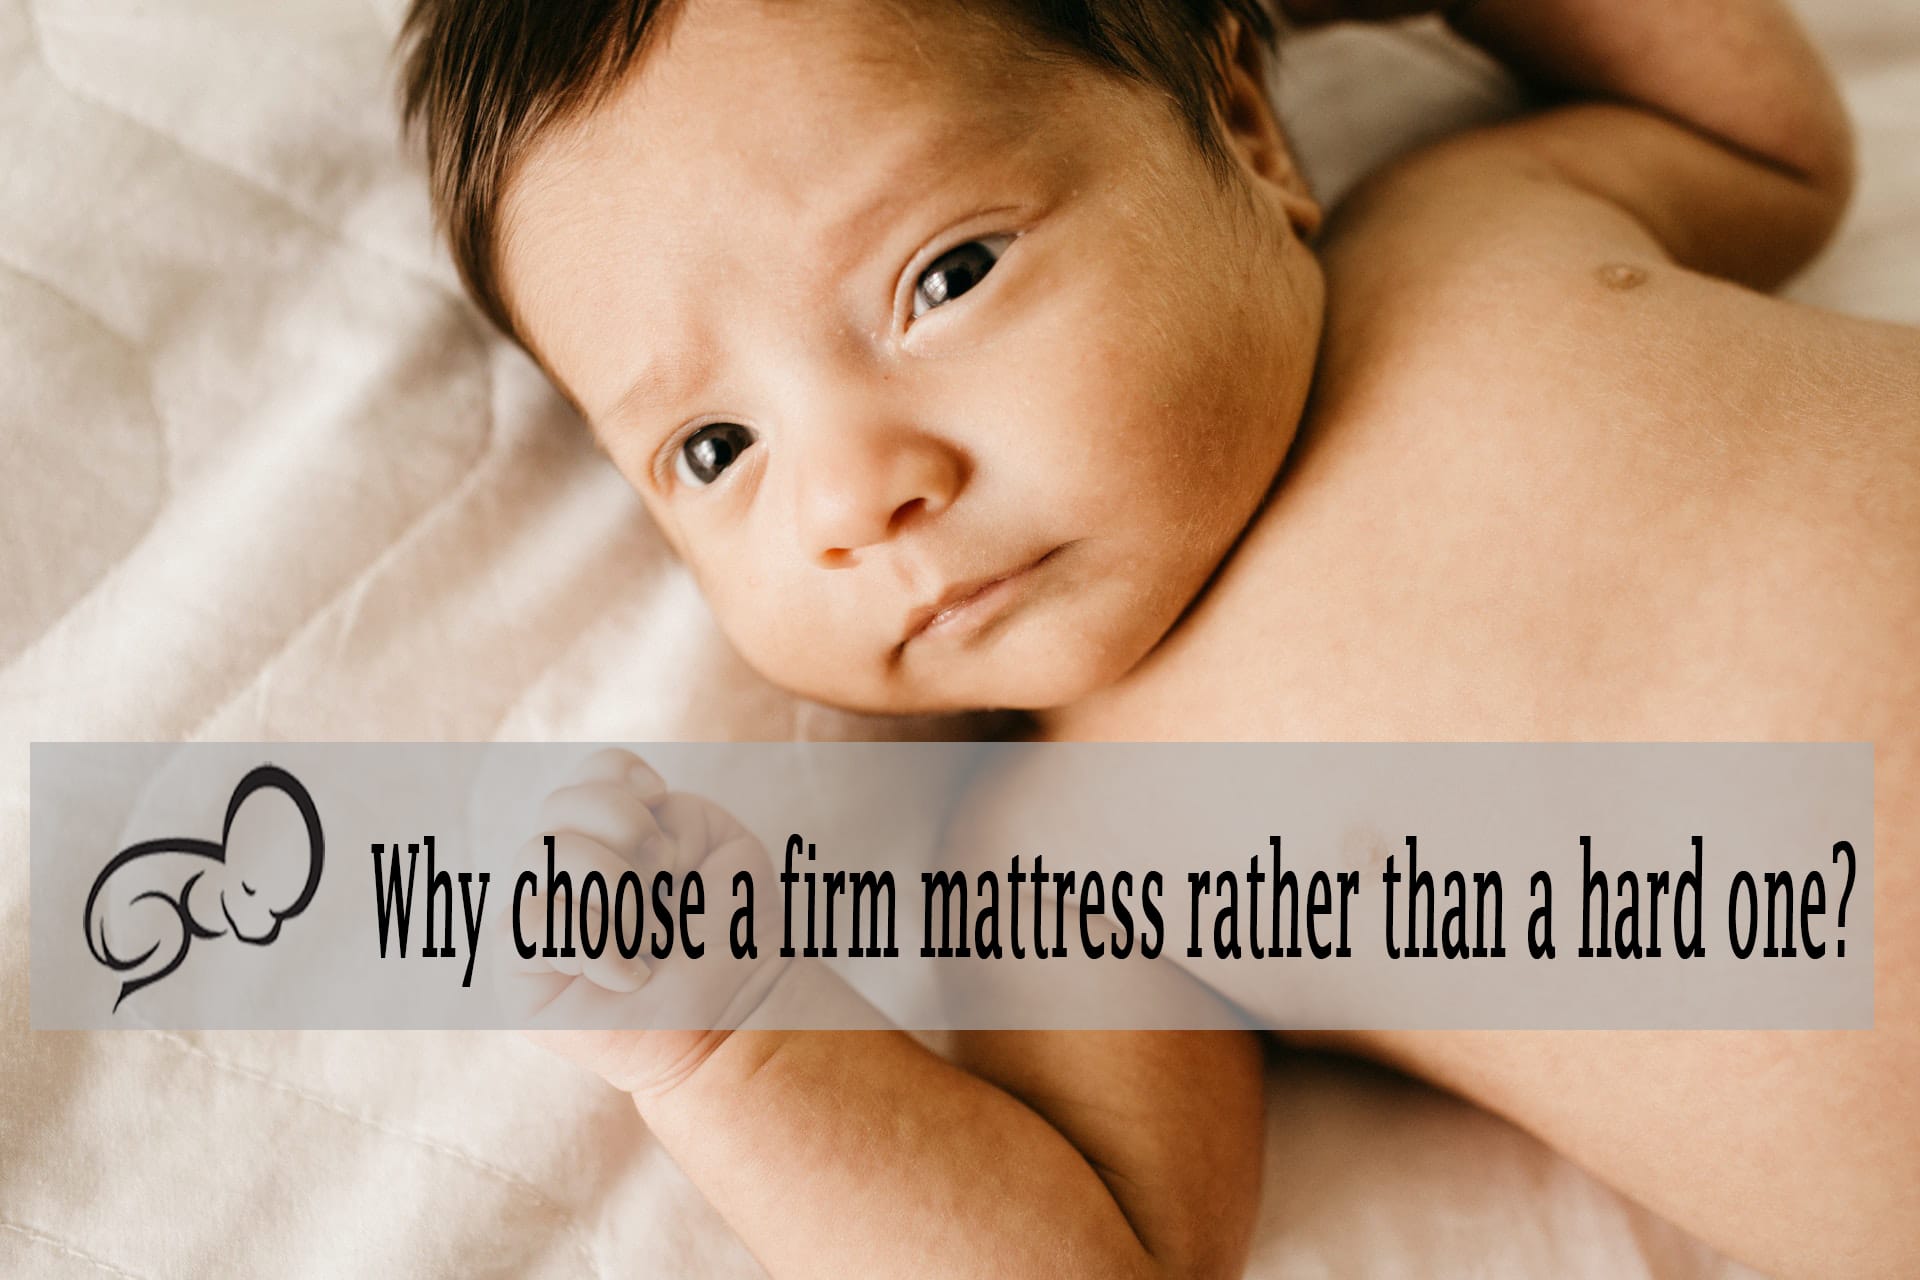 Why choose a firm mattress rather than a hard one?